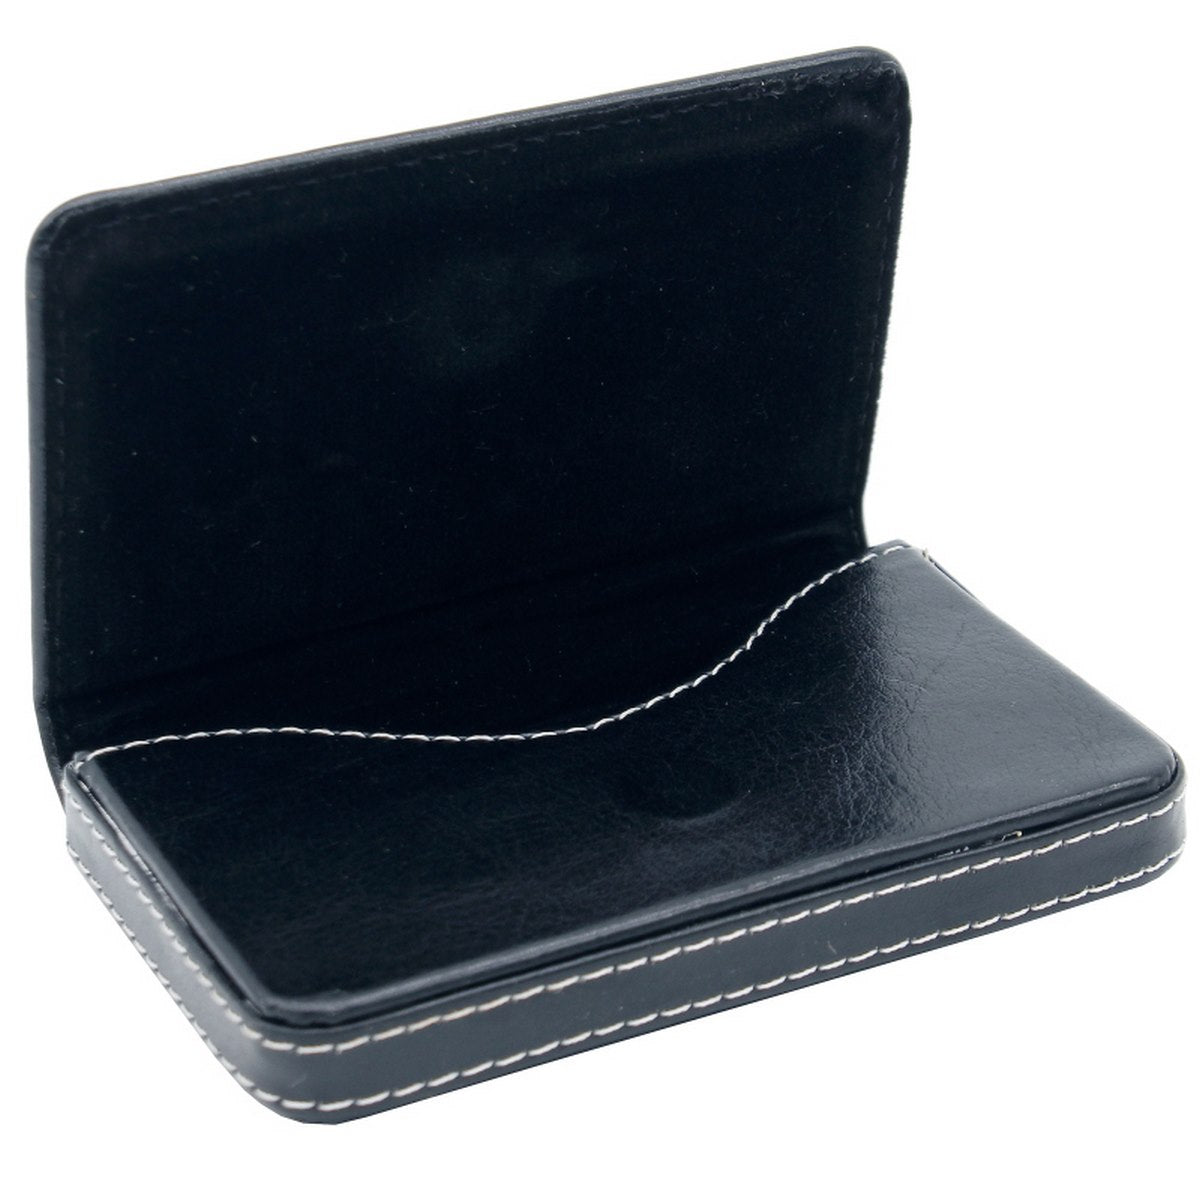 Leather Black Business Card Holder - For Corporate Gifting, Event Gifting, Freebies, Promotions JAMCHB00